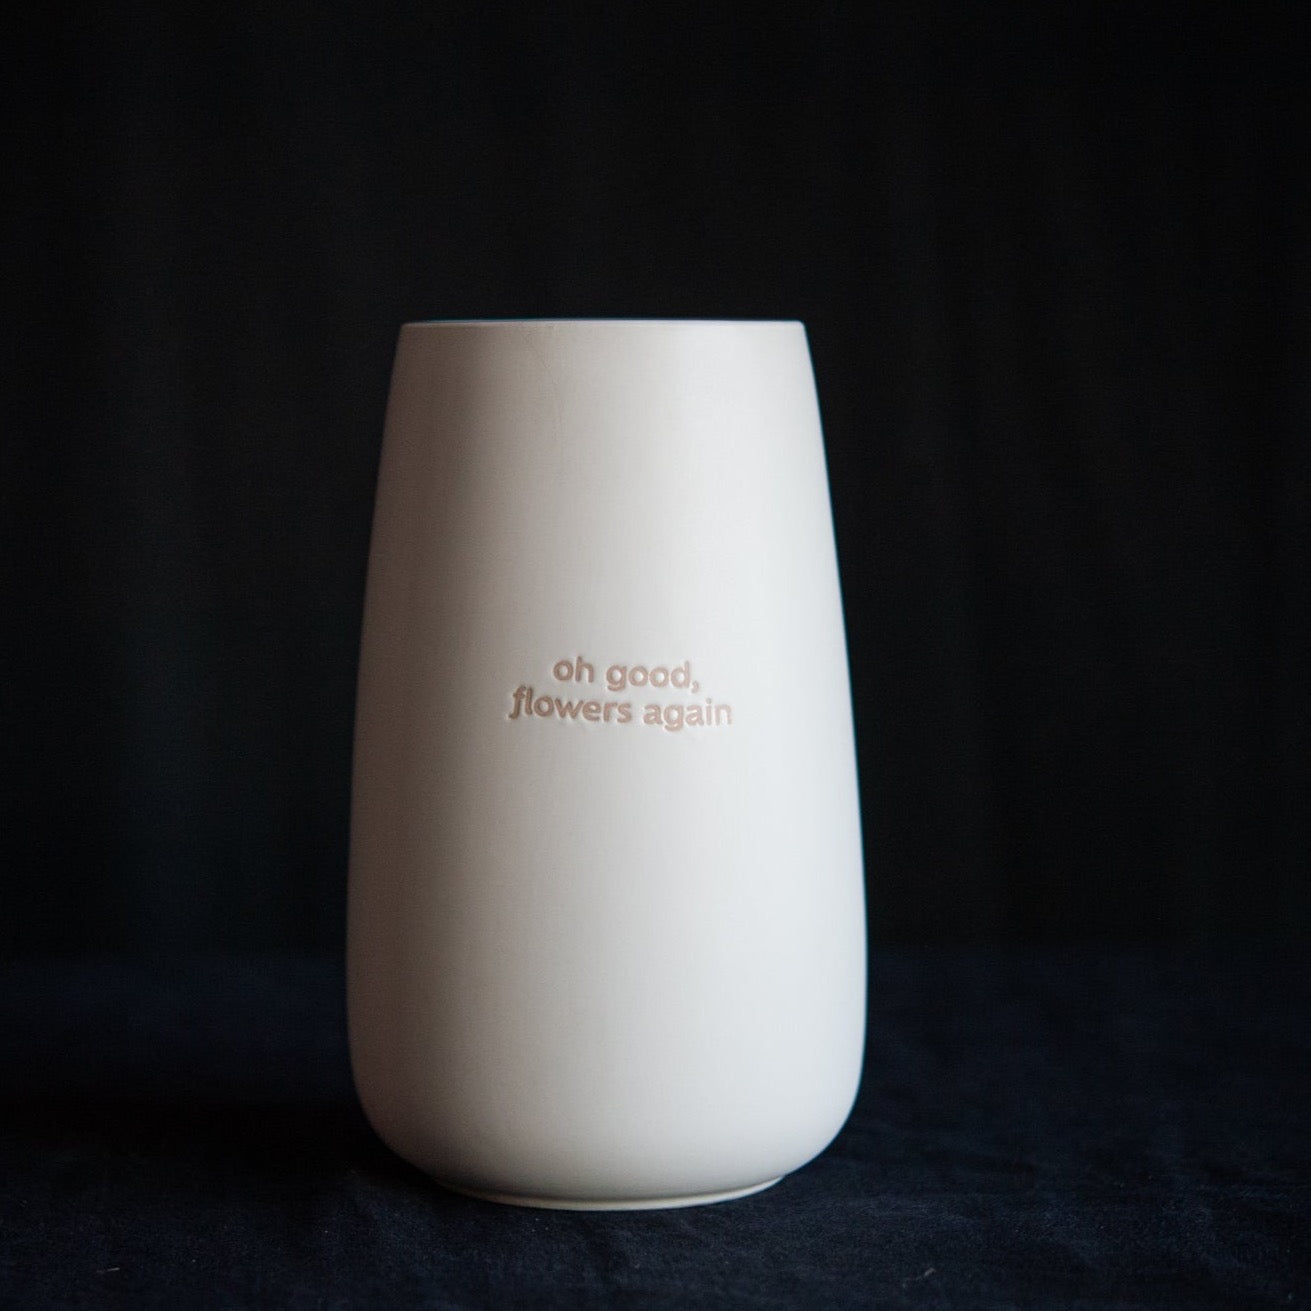 A white ceramic vase that has the message "oh good, flowers again"